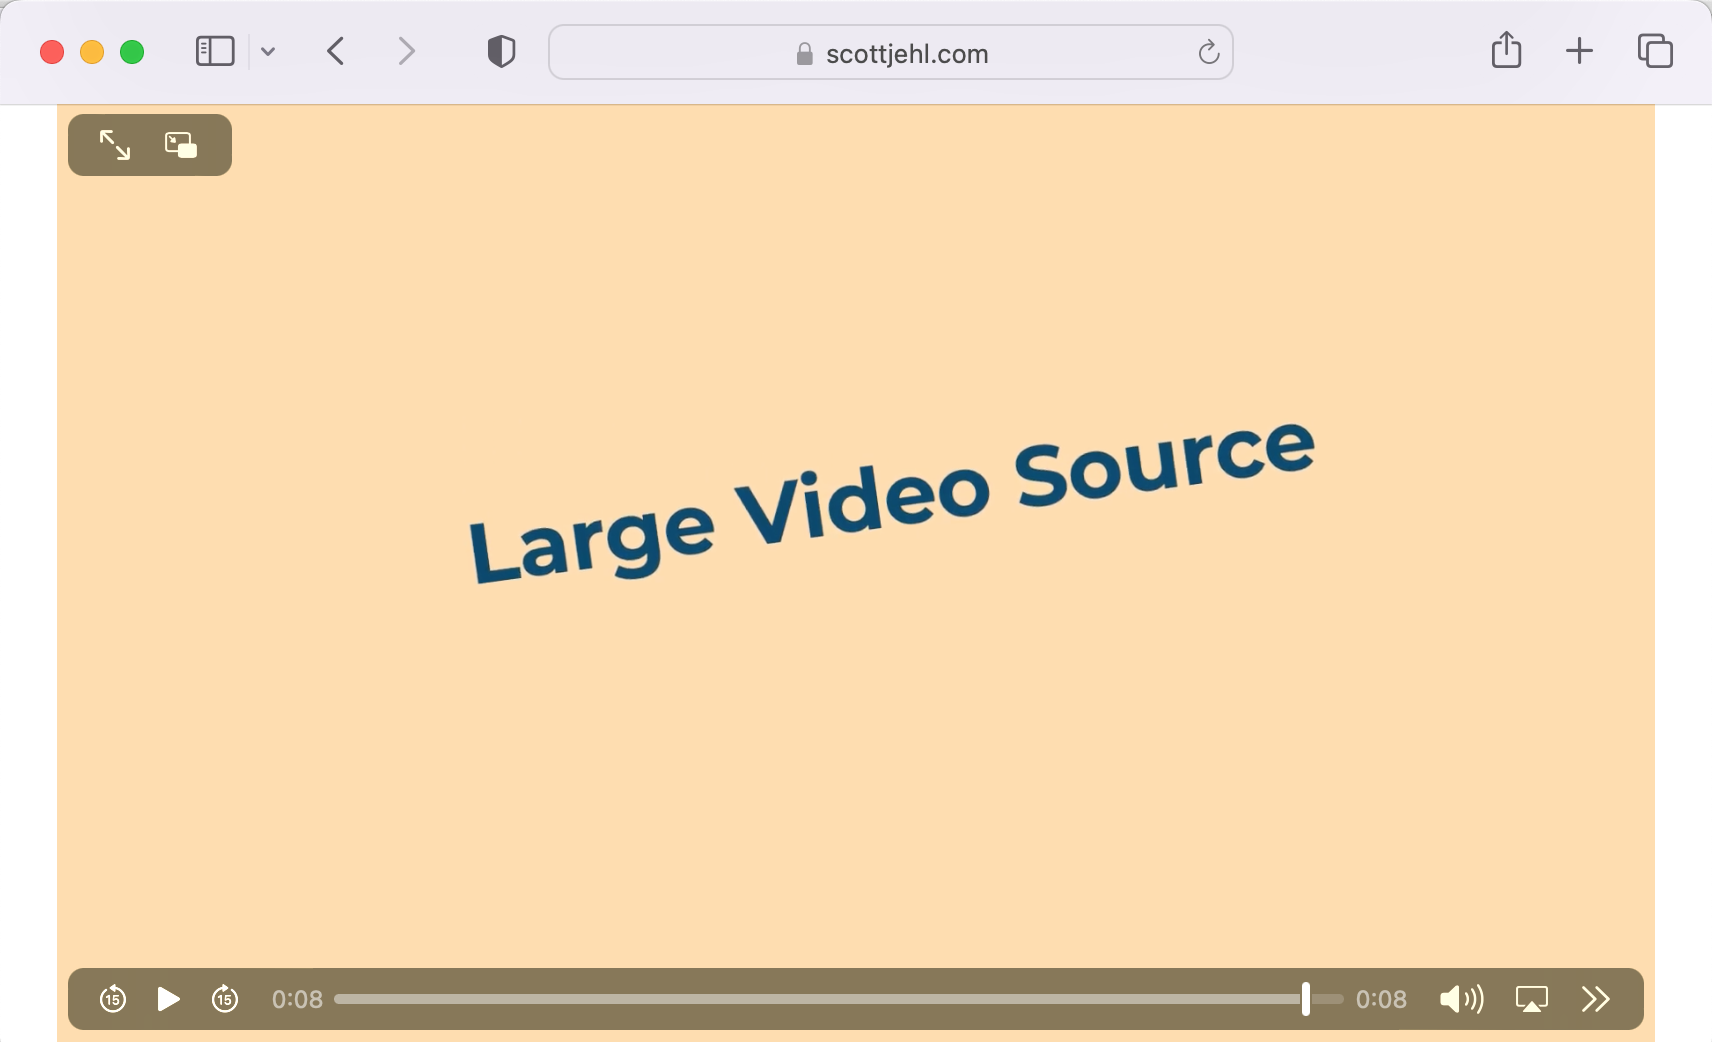 safari screenshot showing a larger window with a large video source, made clear by the text on the video that says large video source